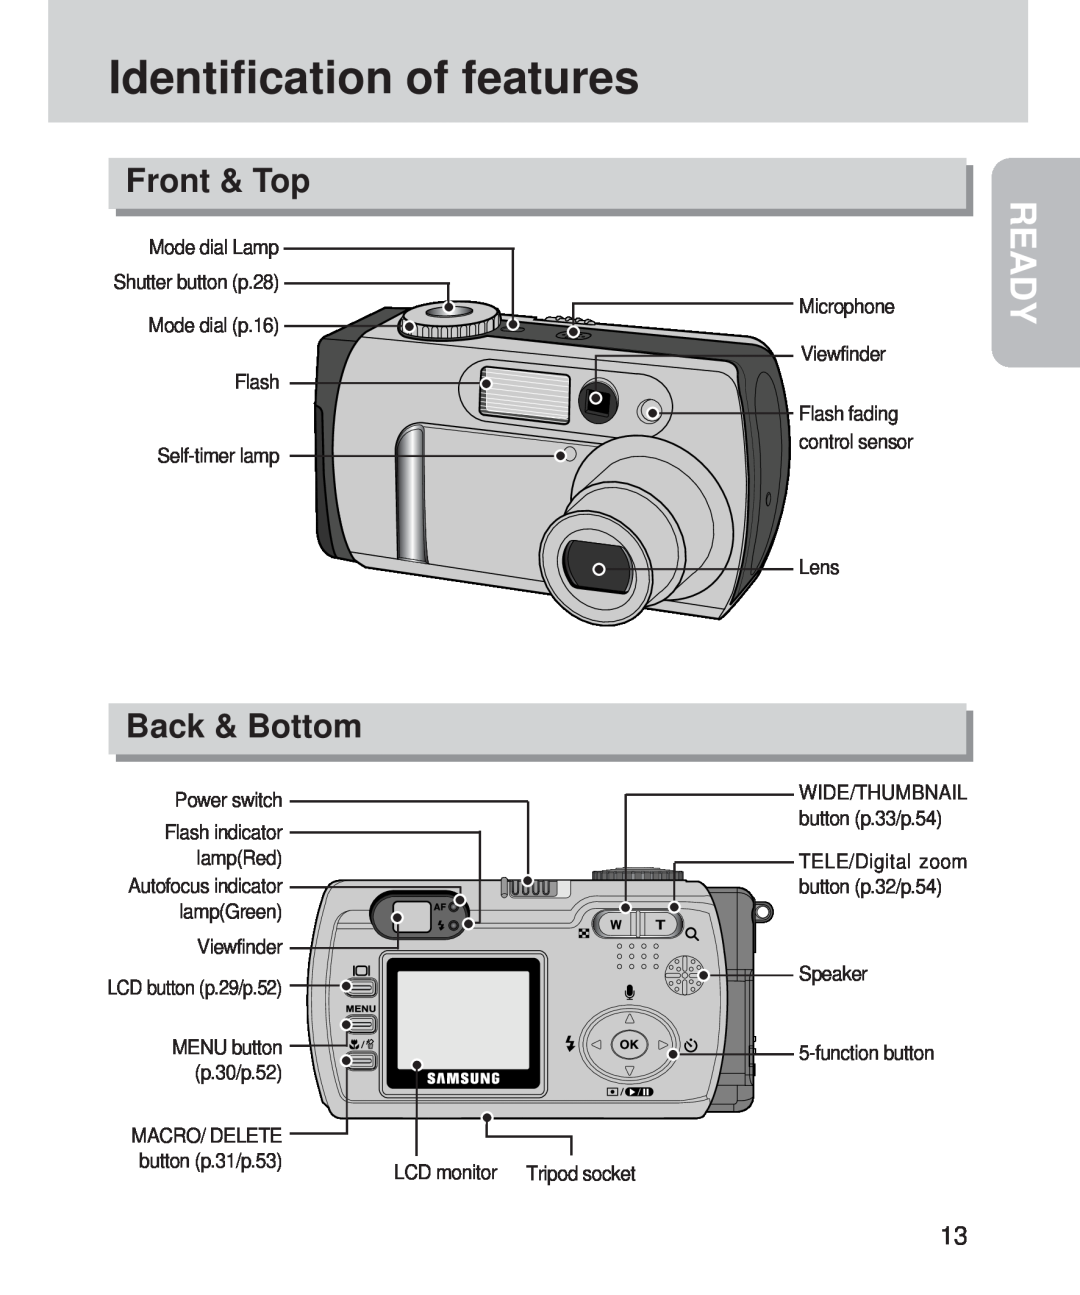 Samsung 420 manual Identification of features, Front & Top, Back & Bottom, Ready 